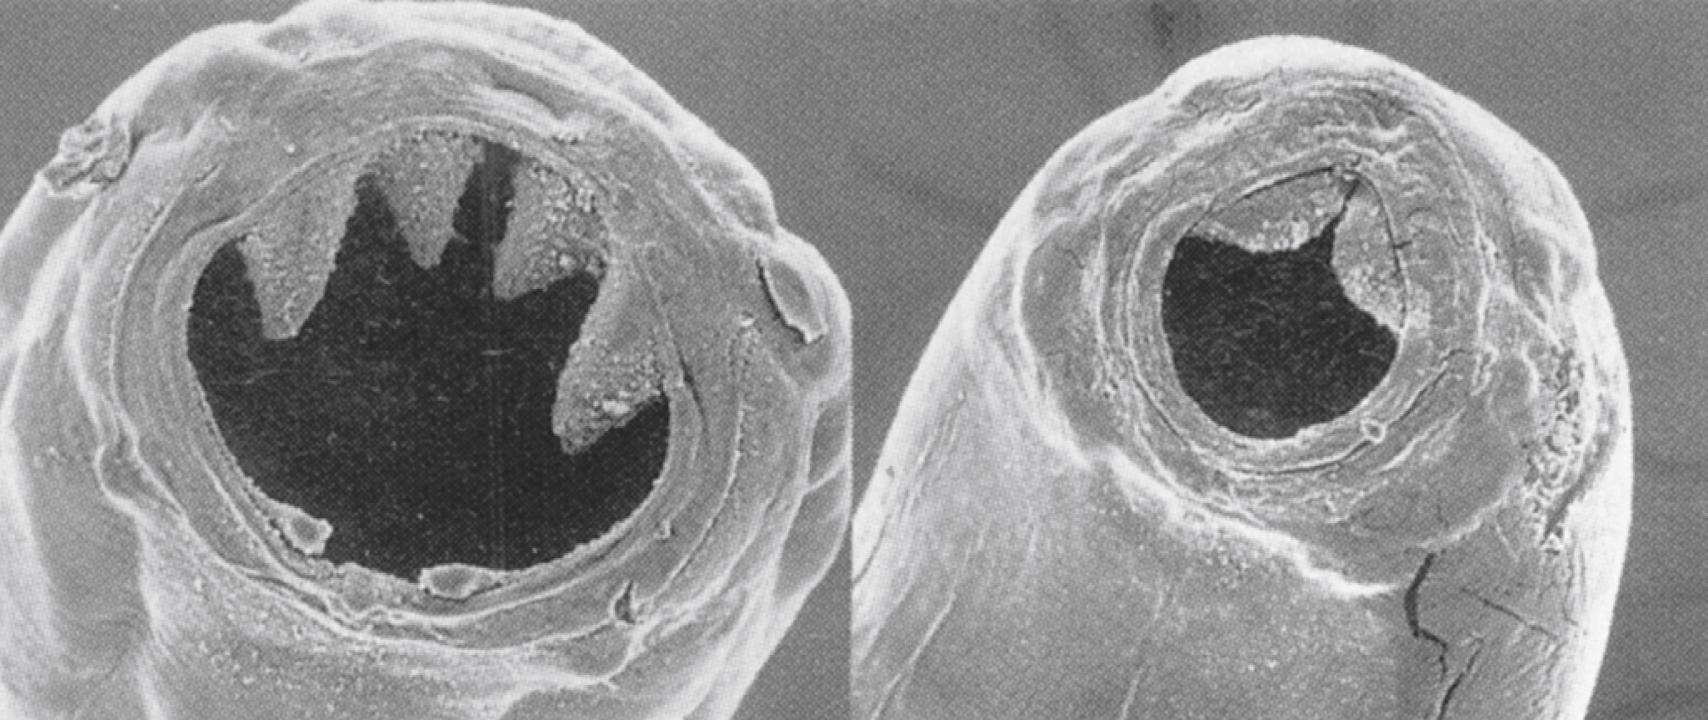 Fig. 114.6, Scanning electron micrographic view of the buccal cavities of A. duodenale (left) and N. americanus (right) .